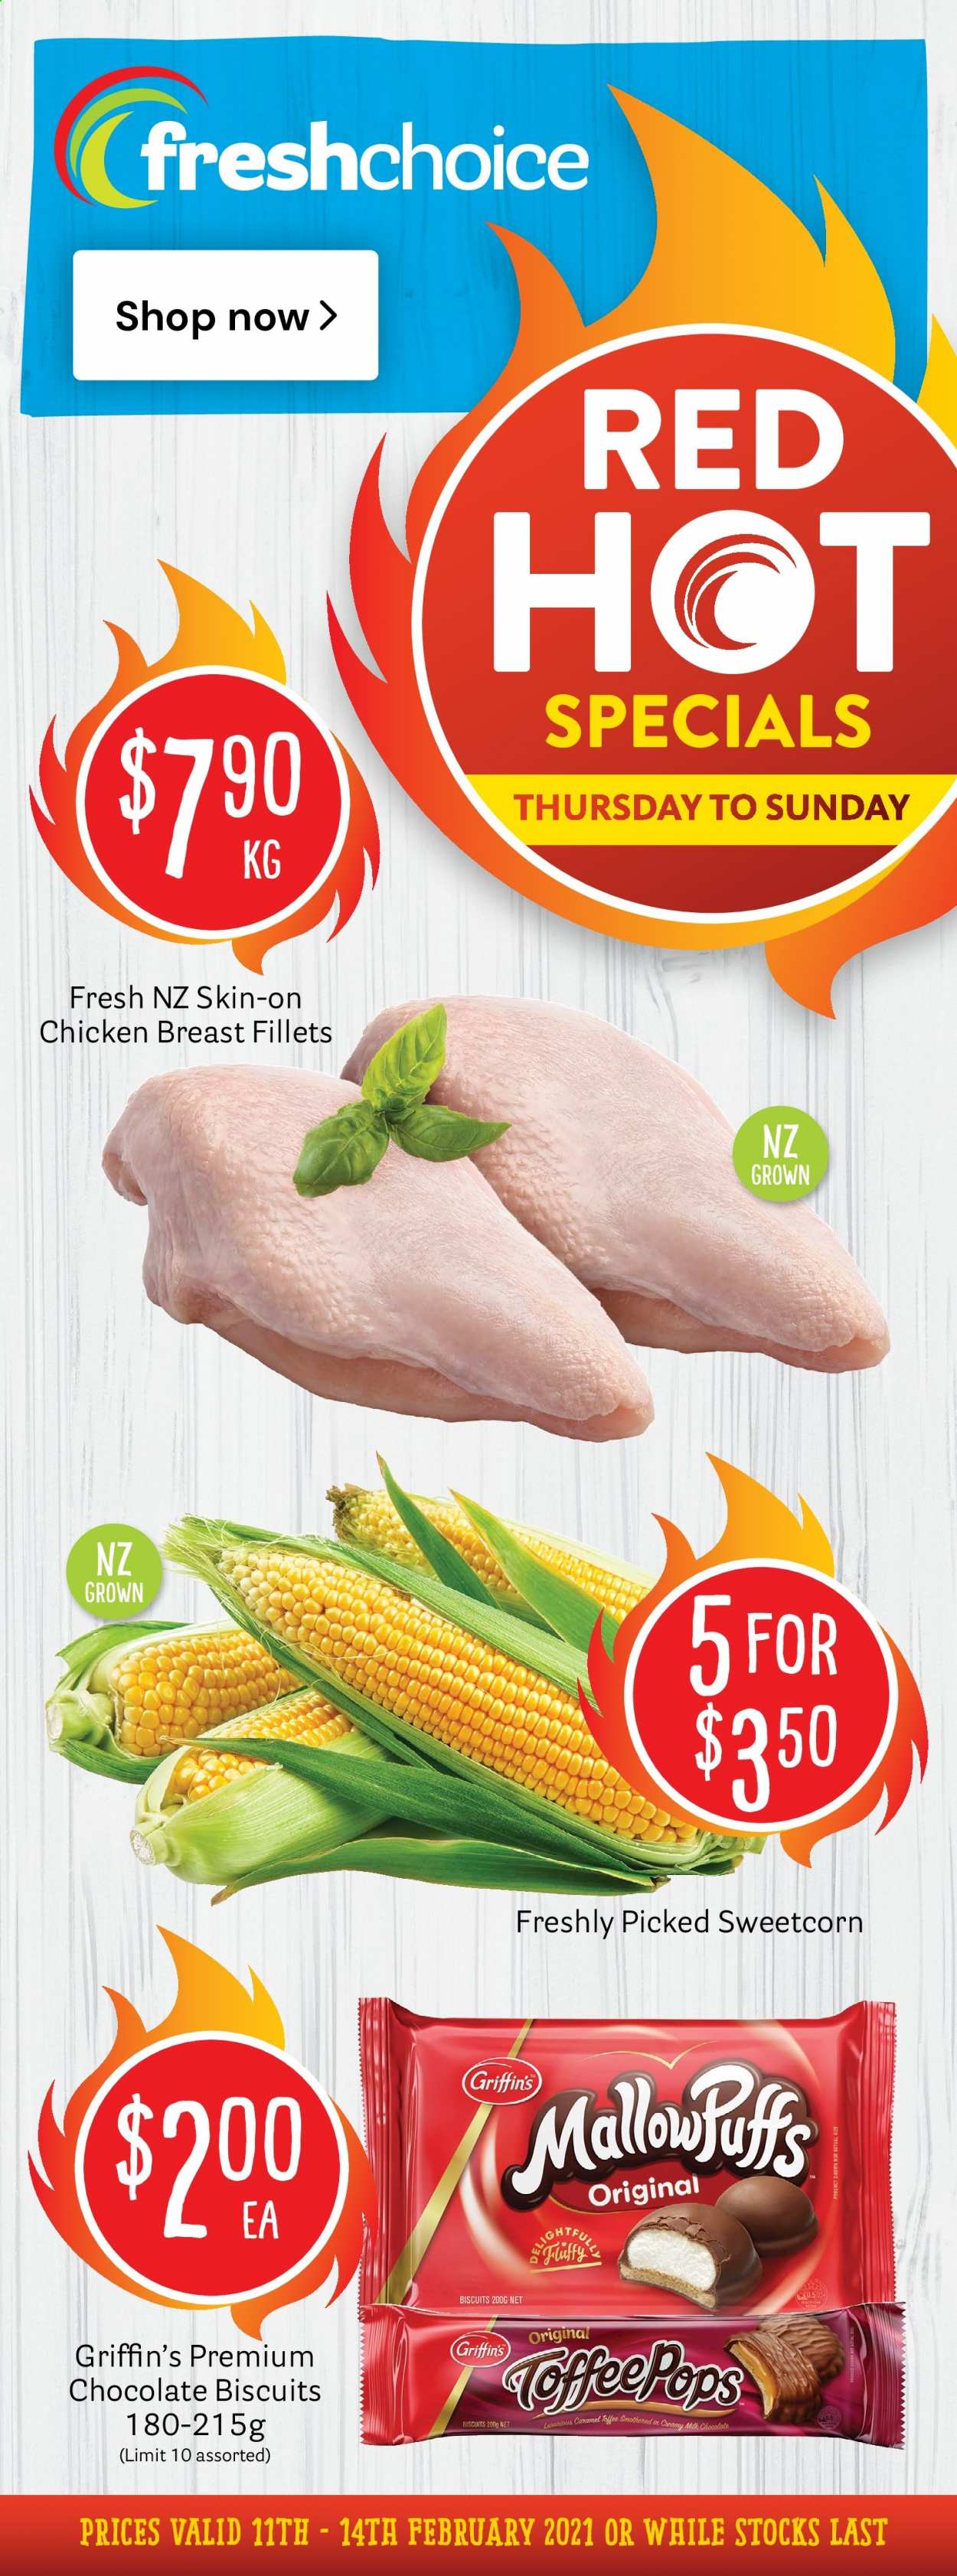 thumbnail - Fresh Choice mailer - 11.02.2021 - 14.02.2021 - Sales products - chocolate, biscuit, MallowPuffs, Griffin's, chicken breasts. Page 1.